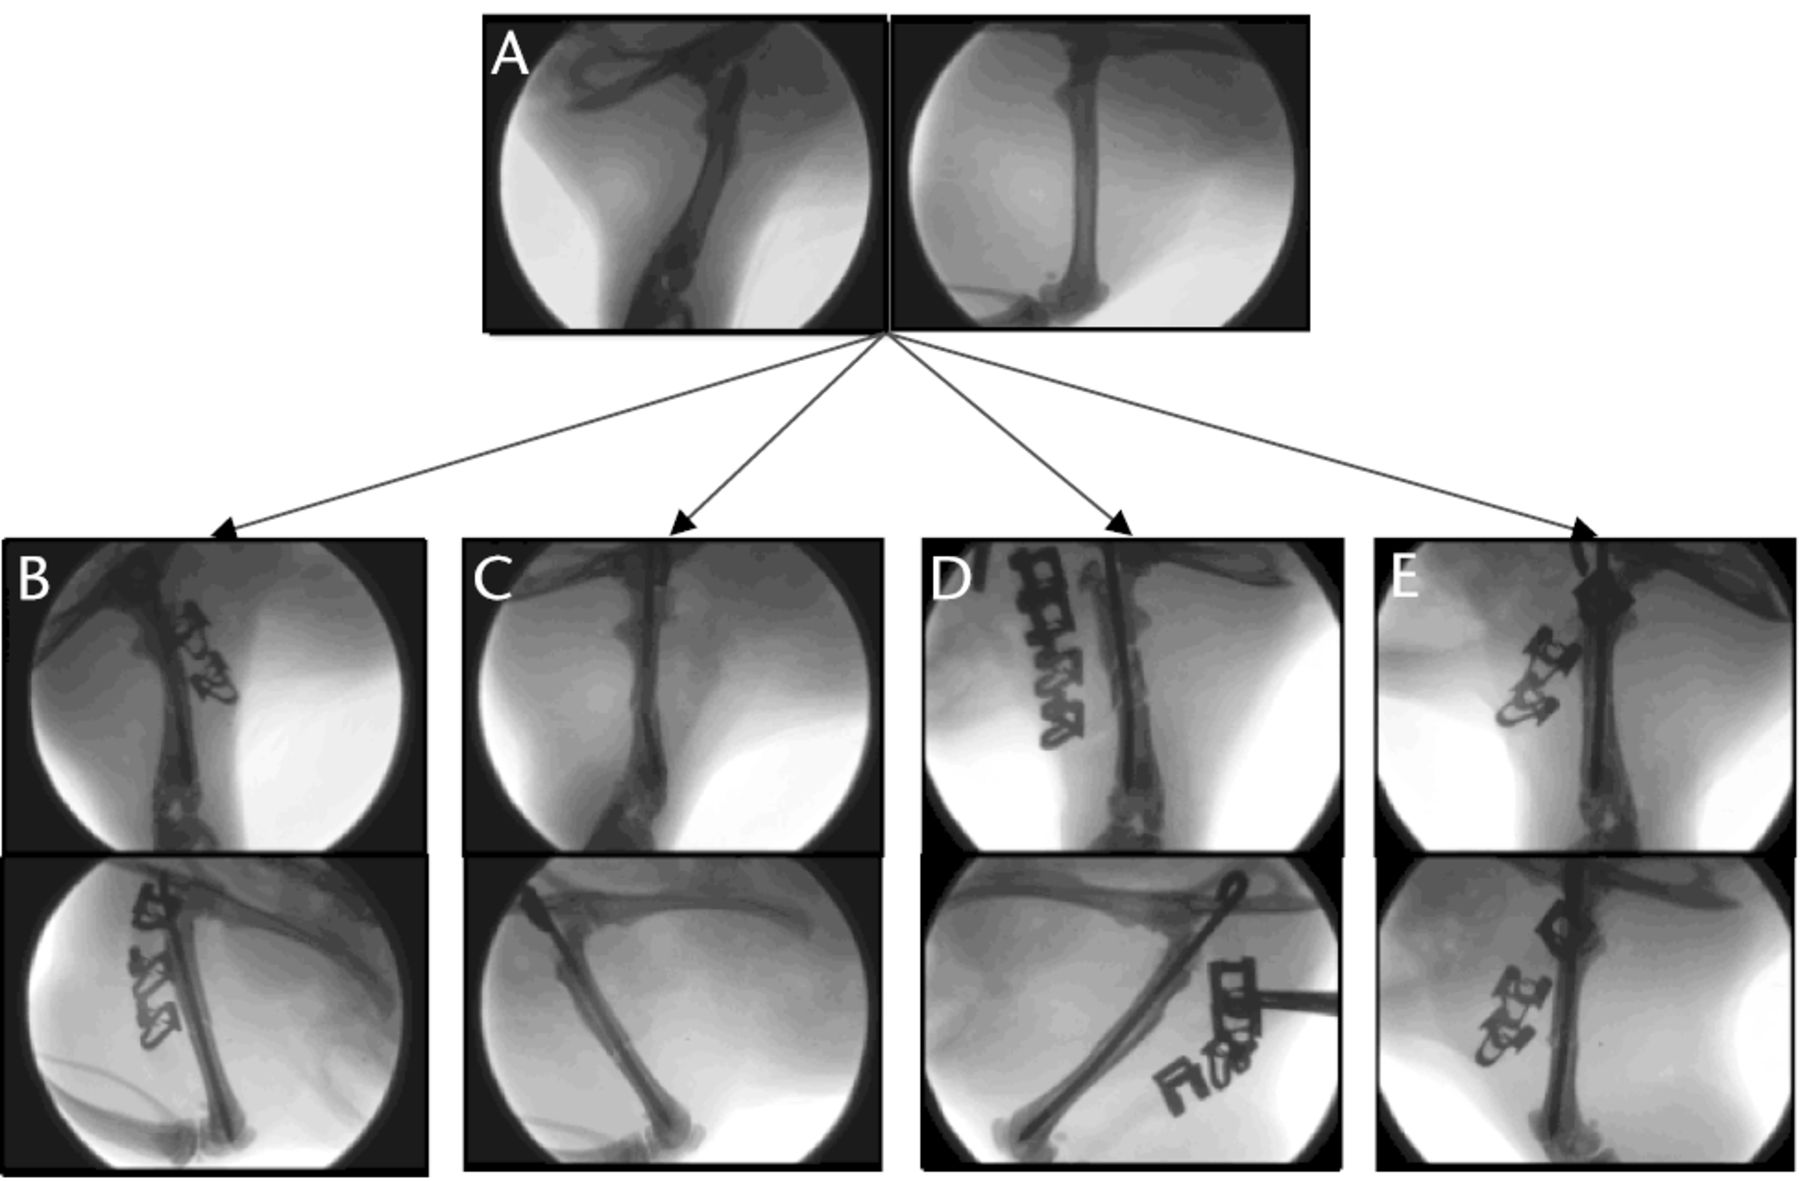 Fig. 3 
          Fluoroscopic images showing the range
of fractures created with a dropping tower: a) normal rat femur,
b) perfect fracture, c) fracture with no bending in the lateral
plane but marked bending in the anteroposterior plane, d) fracture
with slight comminution, and e) fracture with excessive comminution.
        